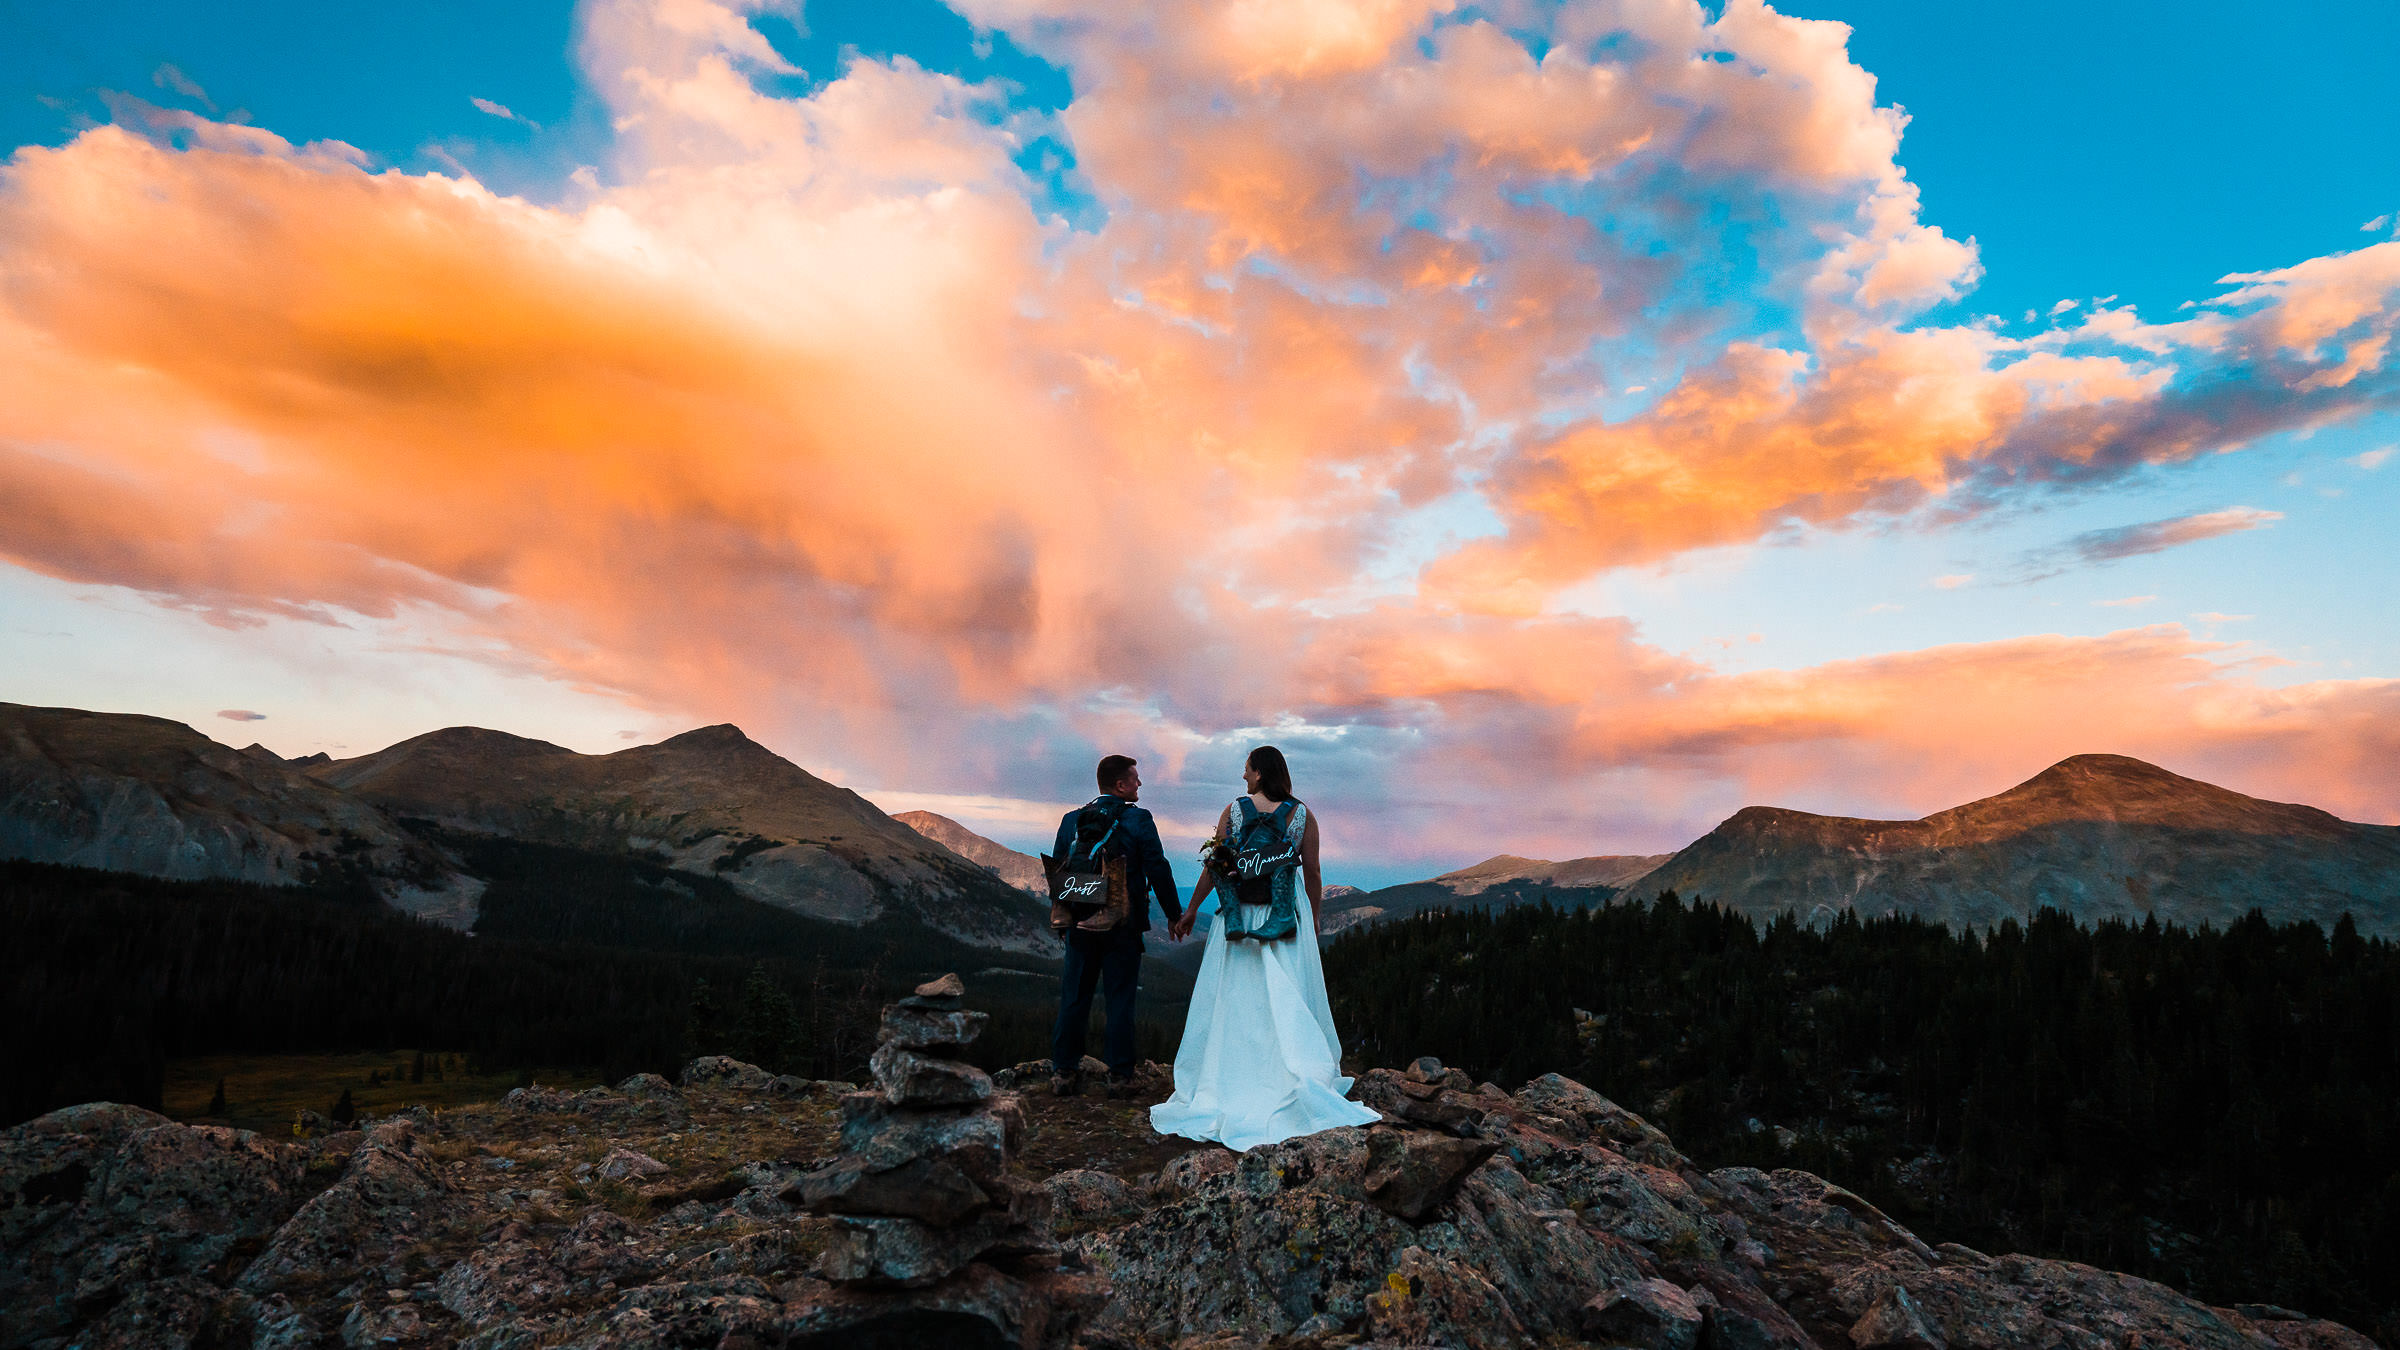 Bride and groom hiking during their elopement in Colorado at sunset